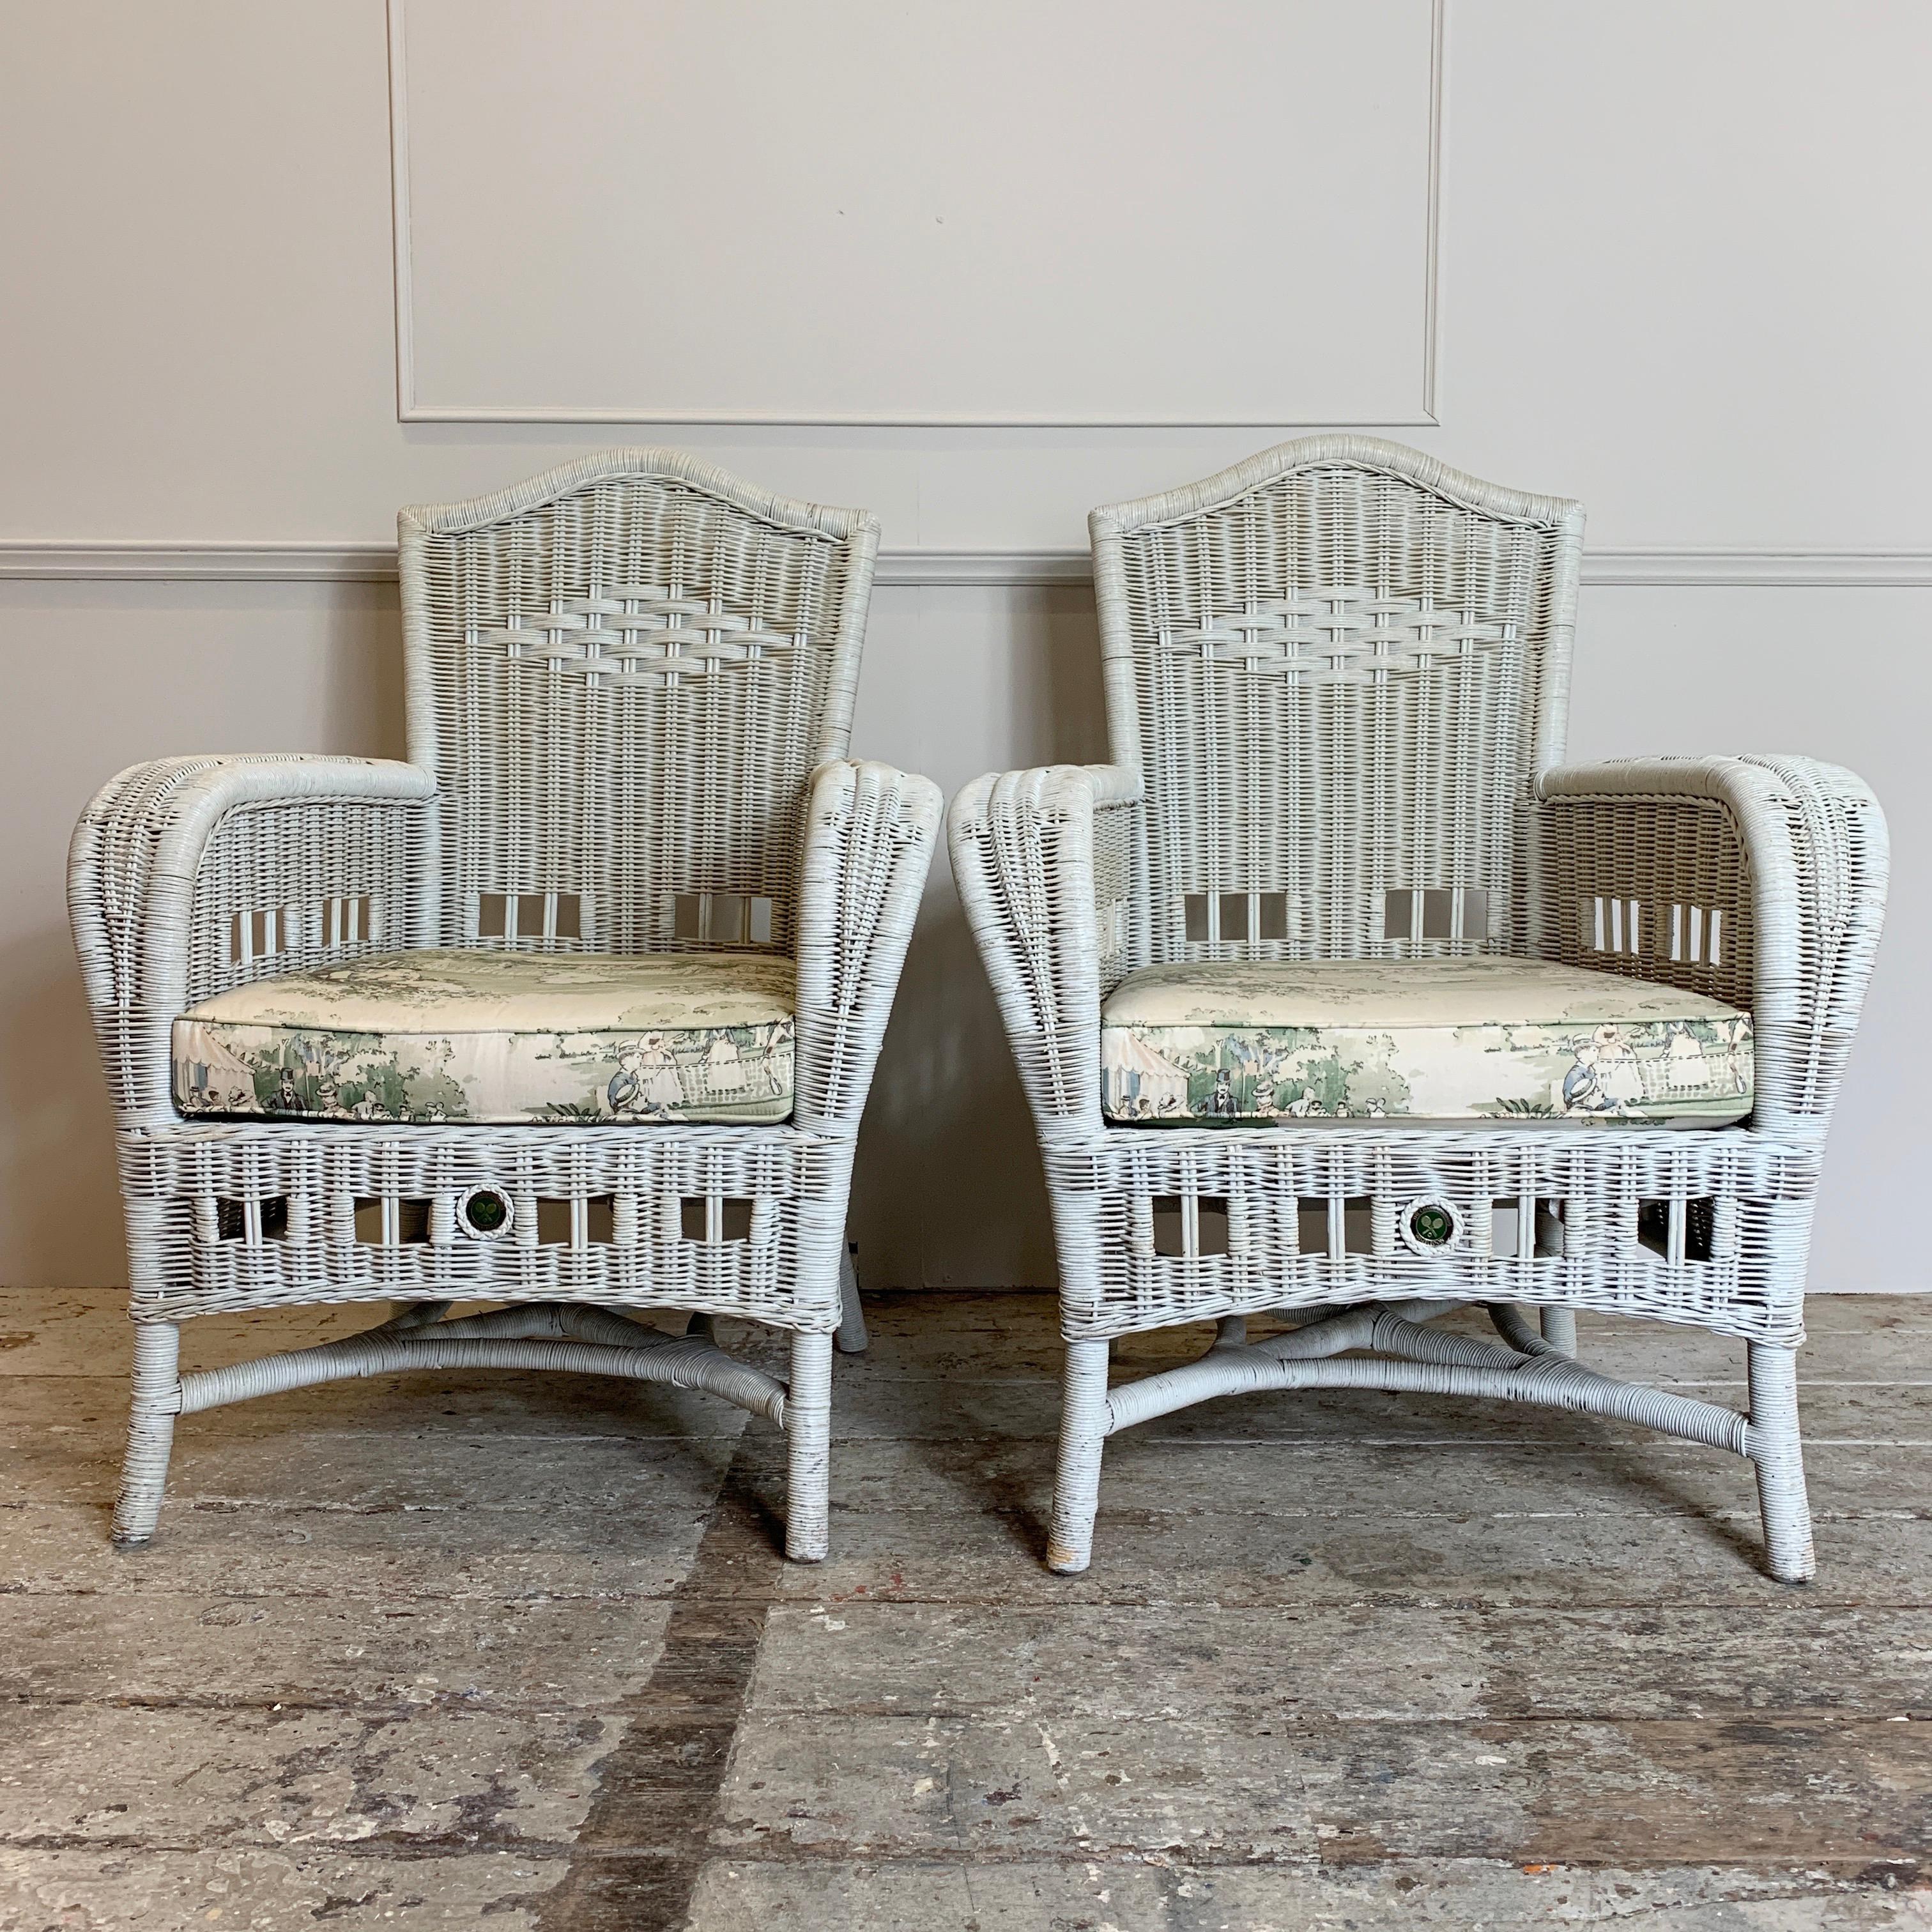 Henry Link, Wimbledon Collection, pair of Wicker chairs
A pair of wicker chair by Henry Link
These chairs were originally in use at Wimbledon Tennis Club in London itself, so have sat some important people no doubt
The chairs have come directly